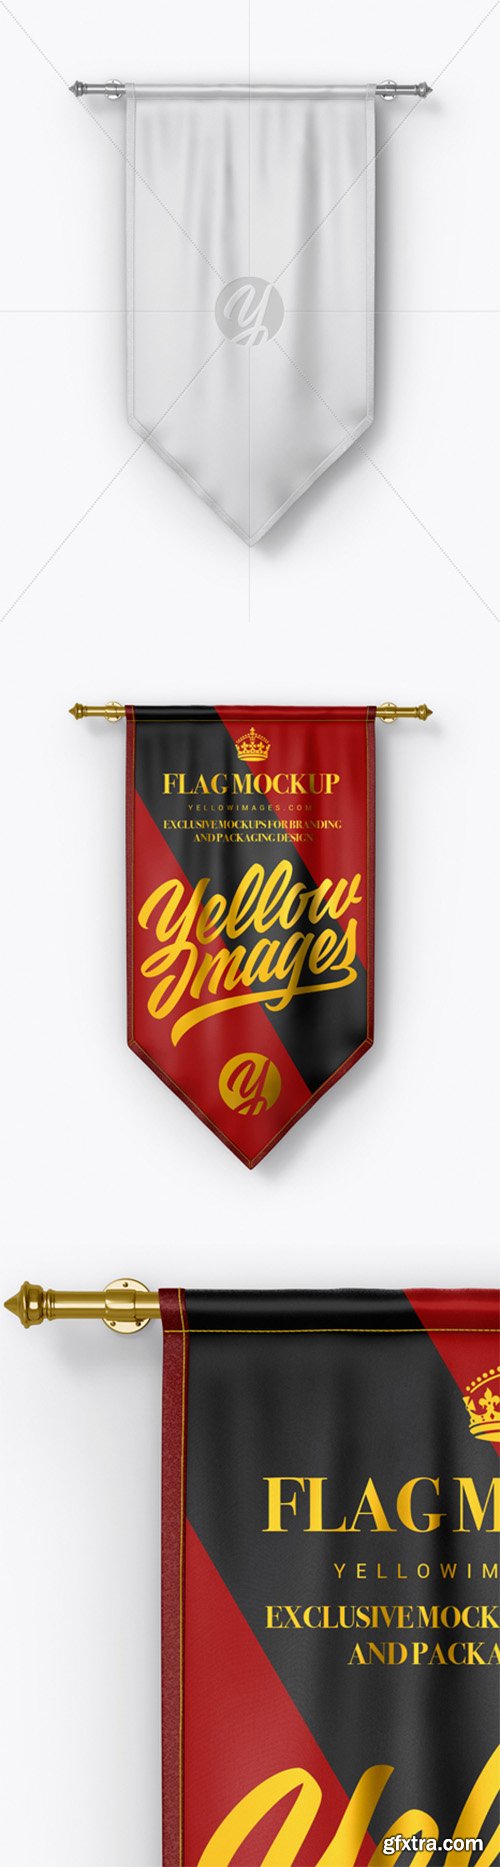 Vertical Flag Mockup - Front View 19489